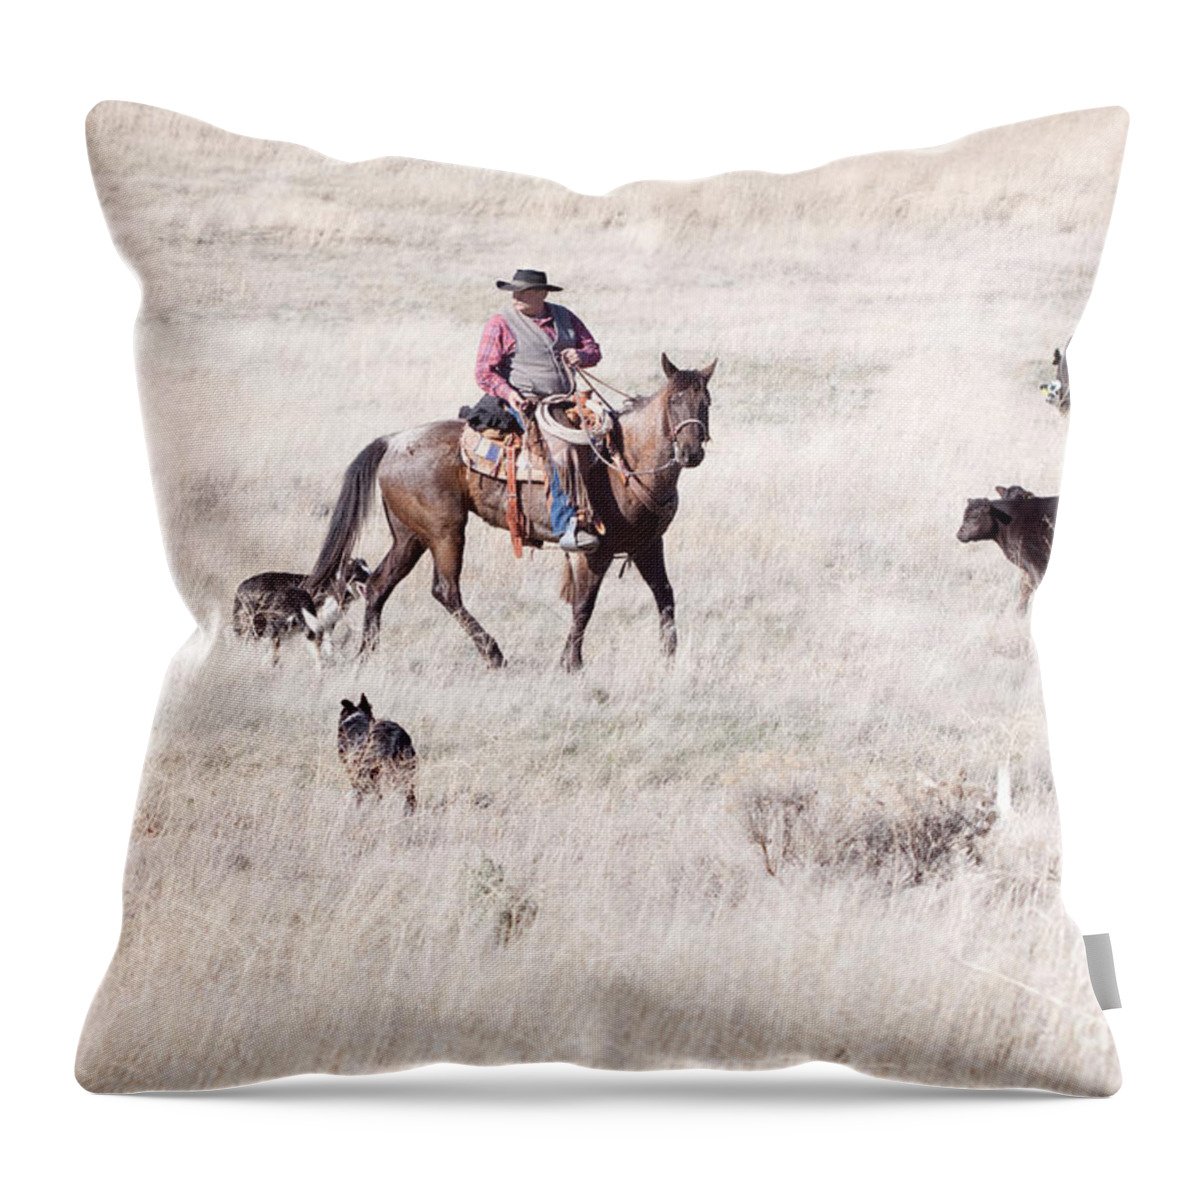 Cowboy Throw Pillow featuring the photograph Cowboy by Cindy Singleton